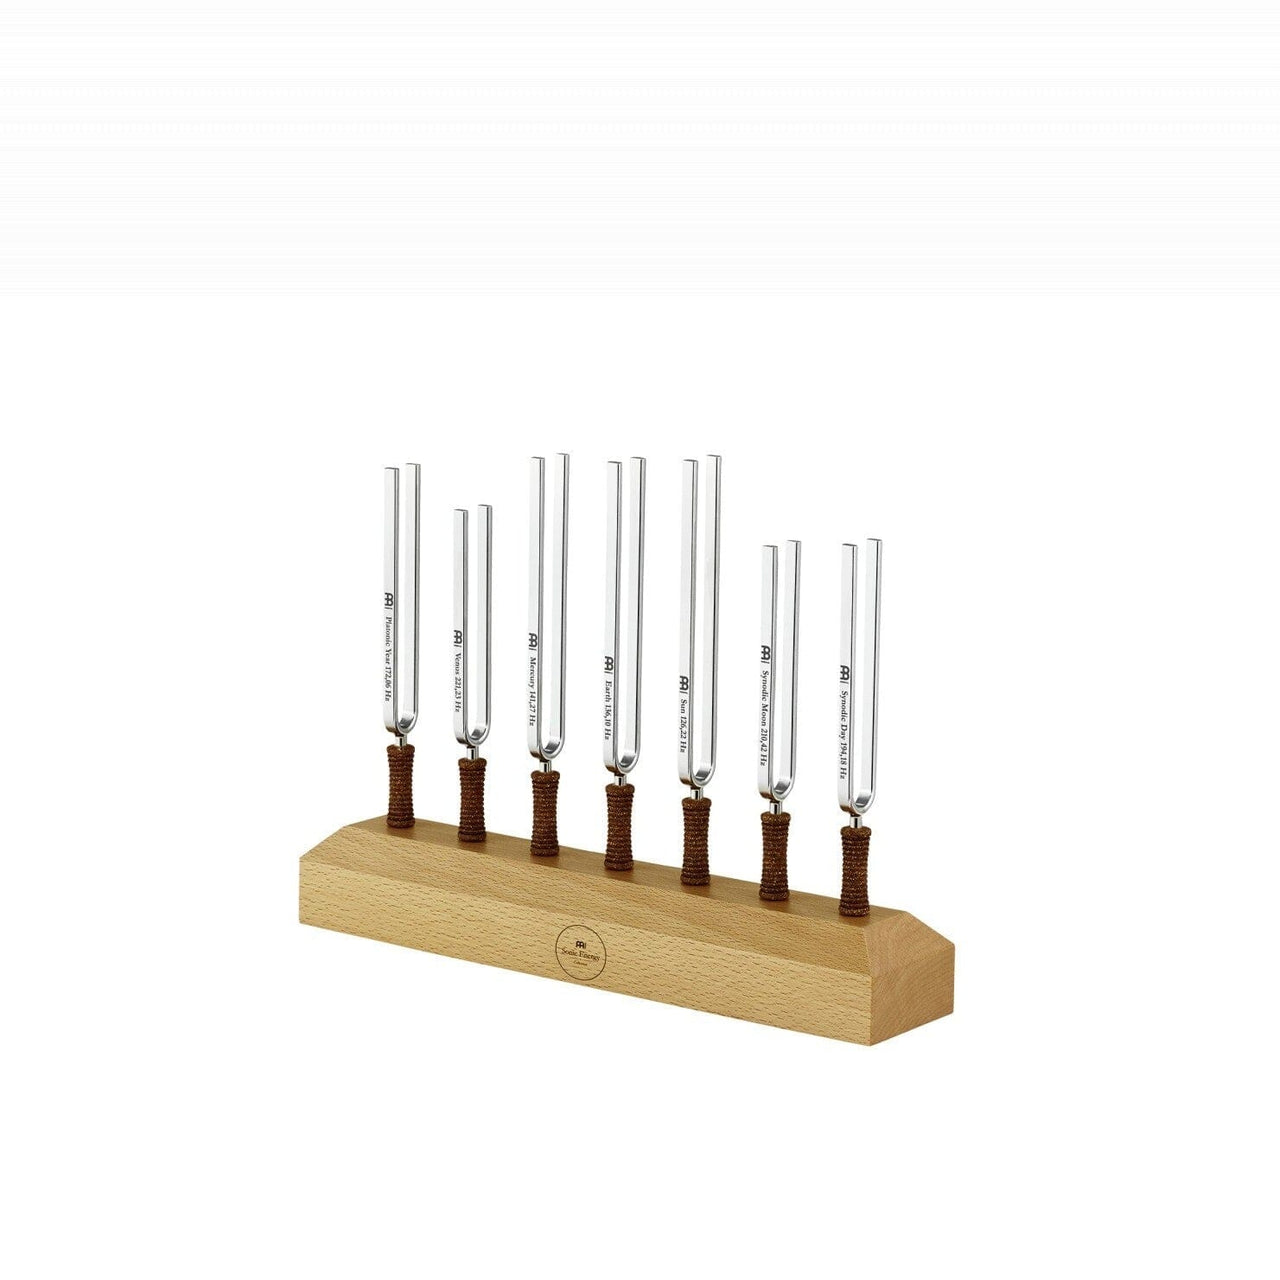 MEINL Sonic Energy Planetary Tuned Tuning Forks, Chakra Set w/ 7 Tuning Forks and Stand (TF-SET-CHA-7) tuning forks Meinl 